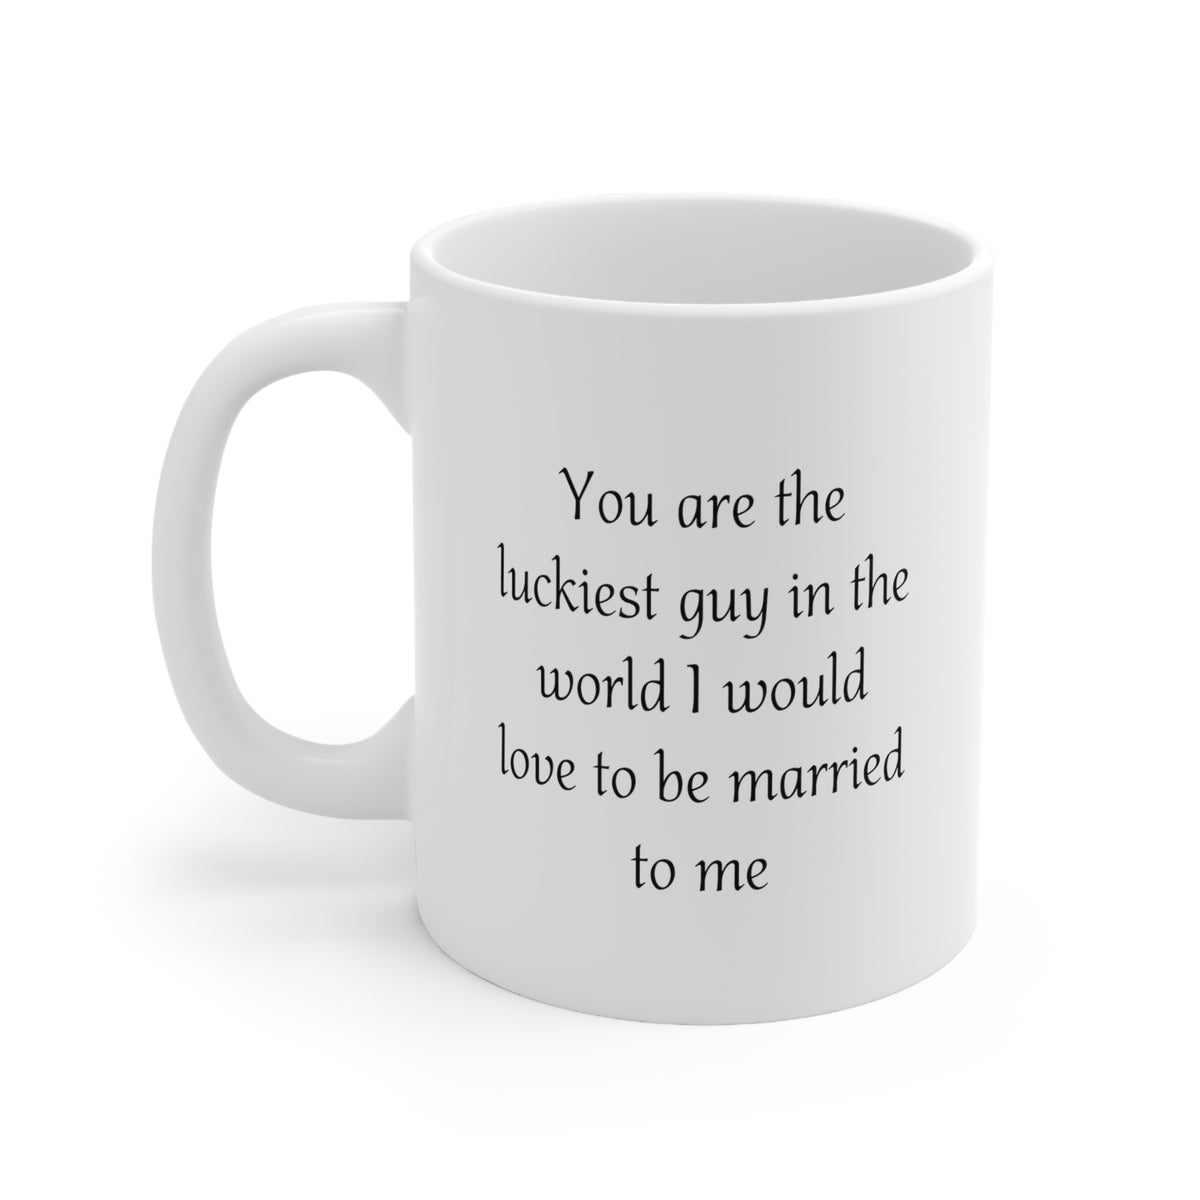 Valentine’s Day Coffee Mug - You are the luckiest guy in the world I would love to be married to me - Funny Gifts For Husband From Wife